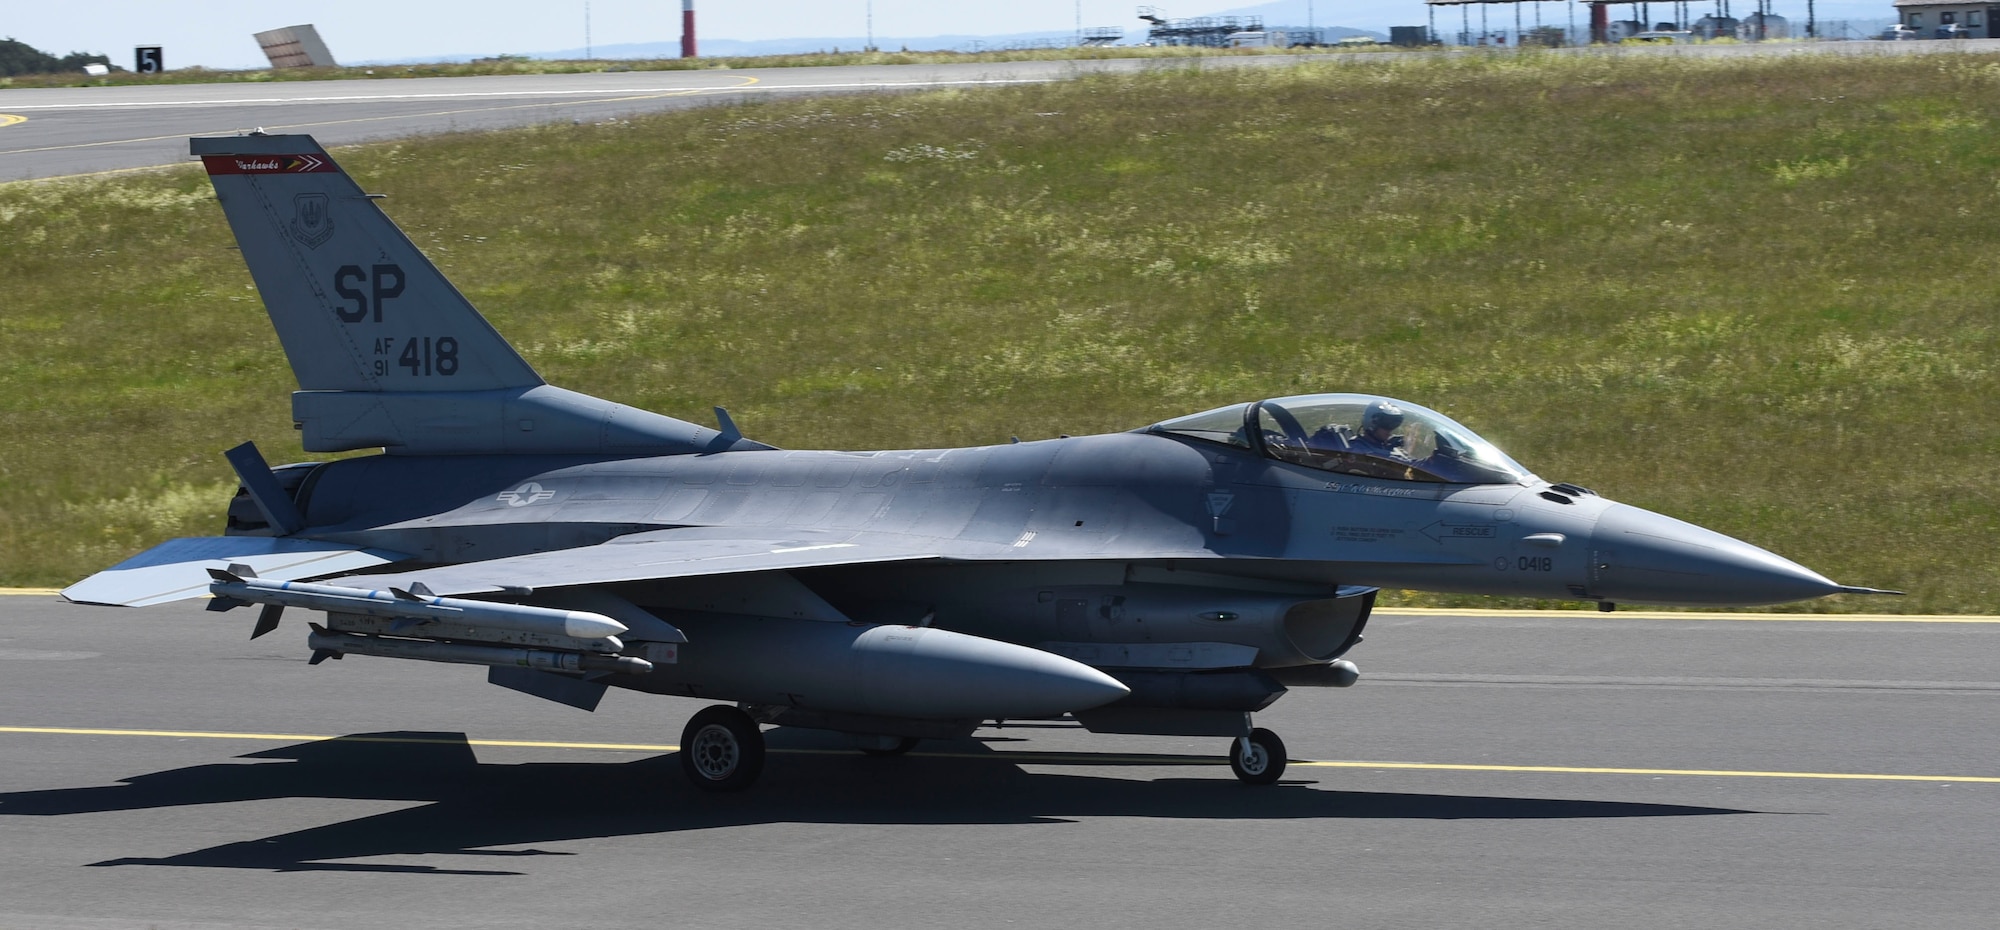 A U.S. Air Force F-16 Fighting Falcon, assigned to the 480th Fighter Squadron, taxis off at Spangdahlem Air Base, Germany, to participate in a large force exercise within the North Sea airspace, U.K., May 27, 2020. The purpose of this LFE was to conduct participating units to conduct training with other U.S Air Forces in Europe units in order to sharpen combat readiness and increase tactical proficiency to maintain a ready force capable of ensuring the collective defense of the NATO alliance. (U.S. Air Force photo by Senior Airman Melody W. Howley)